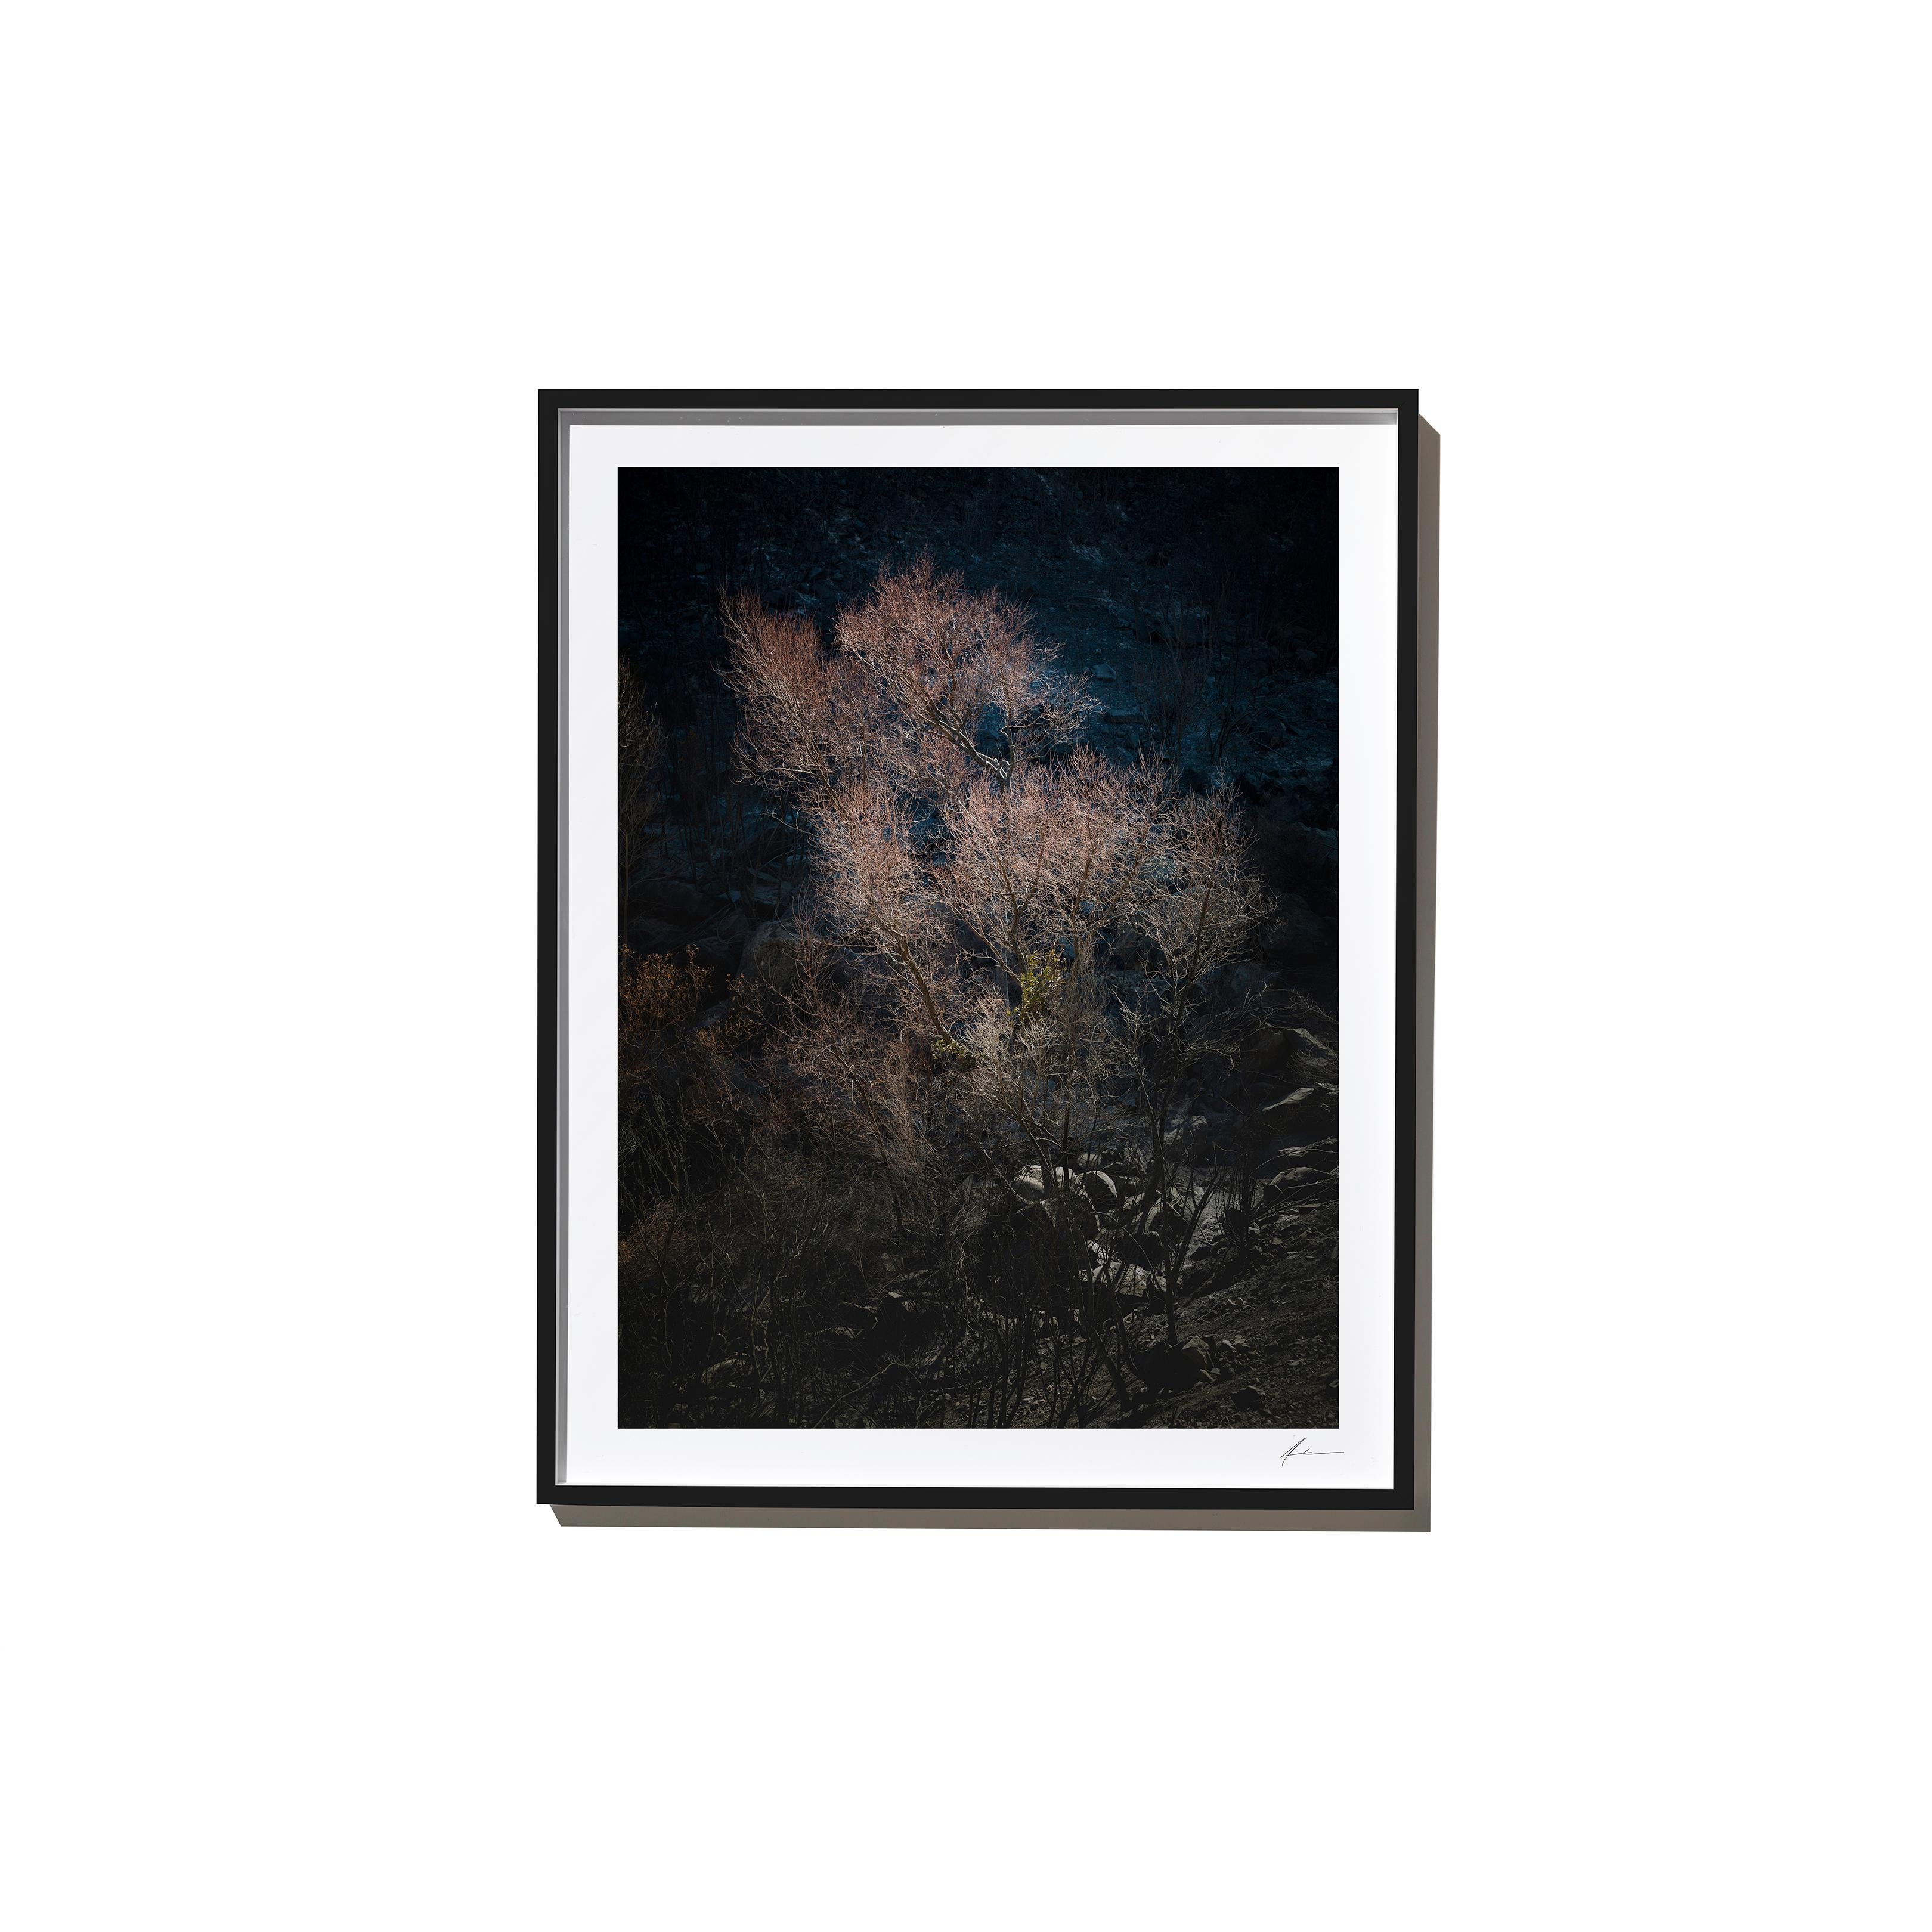 Rose, 2017, from the Survivors series (Framed Color Landscape Photography) - Print by Timothy Hogan